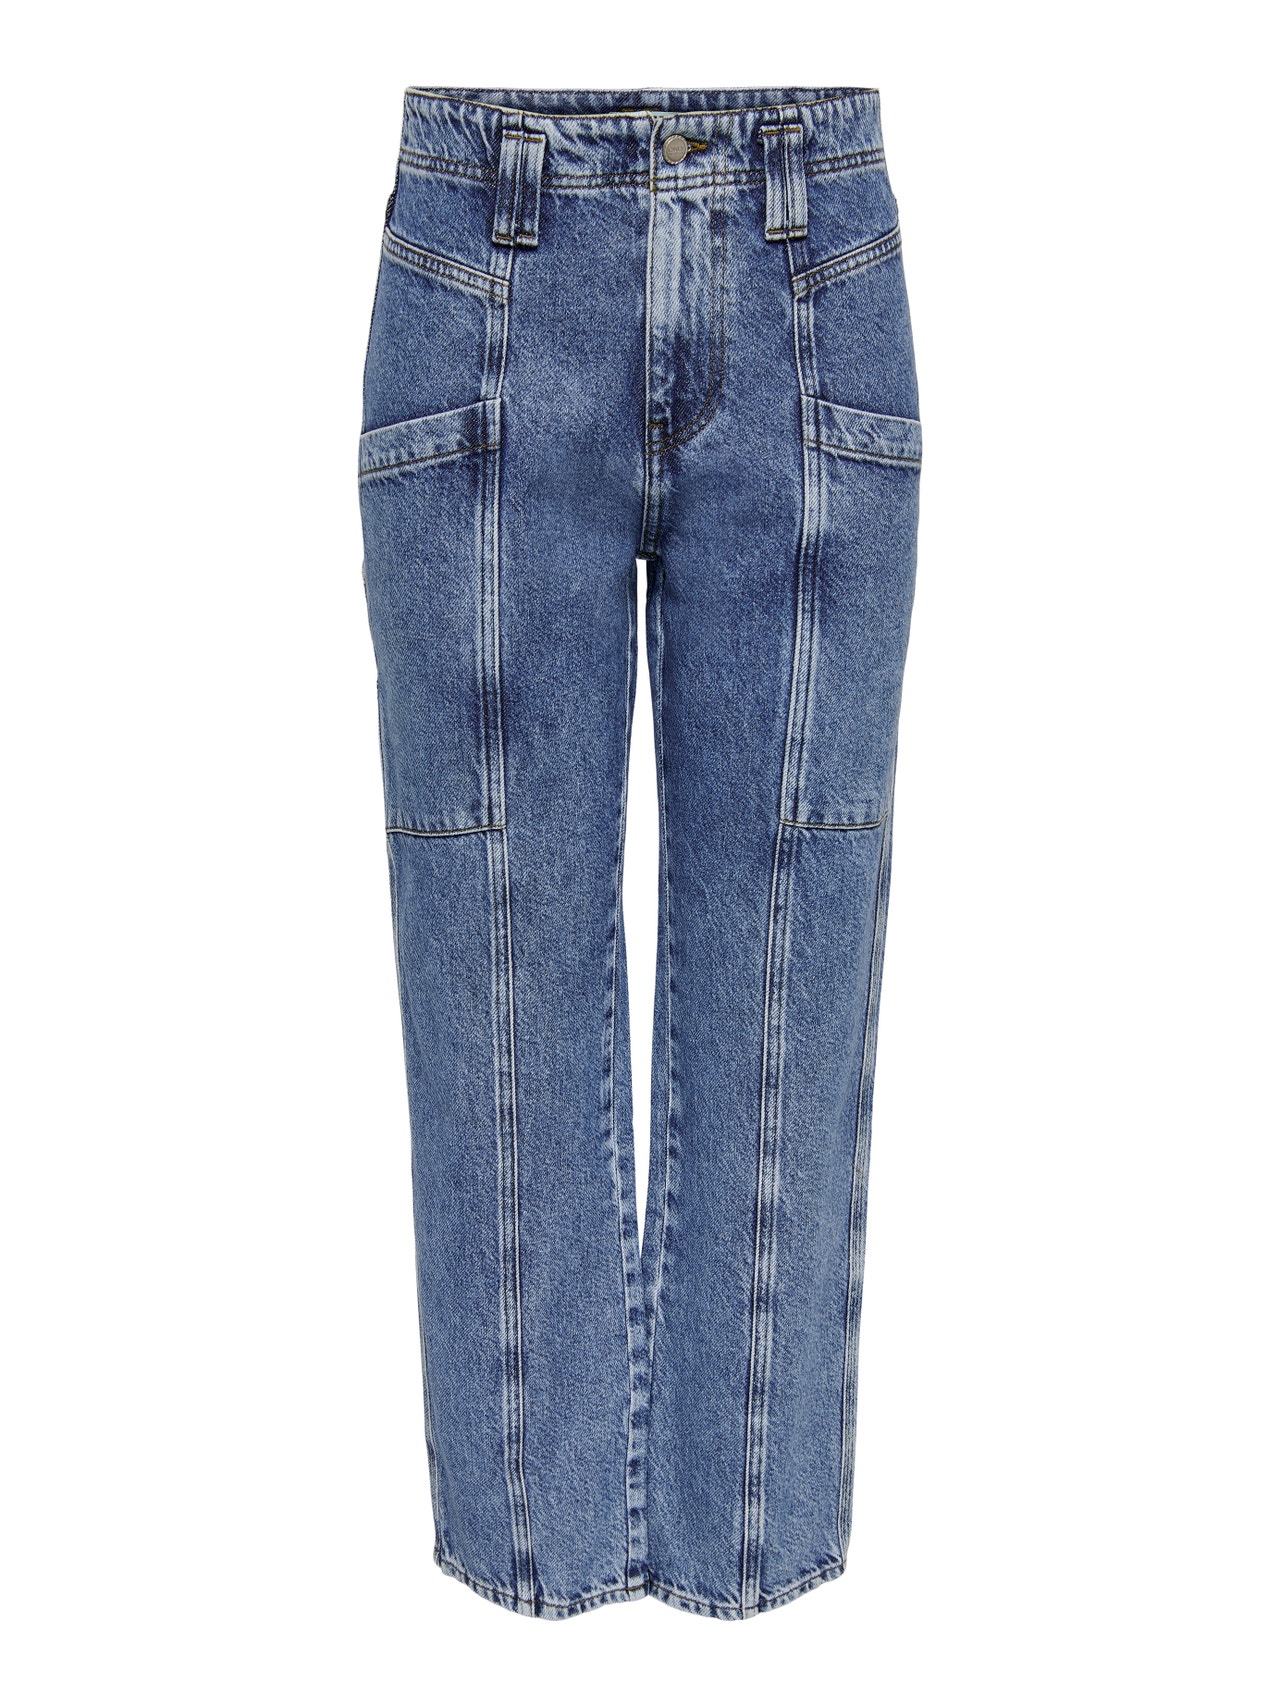 Straight Fit Extra high waist Jeans with 20% discount!